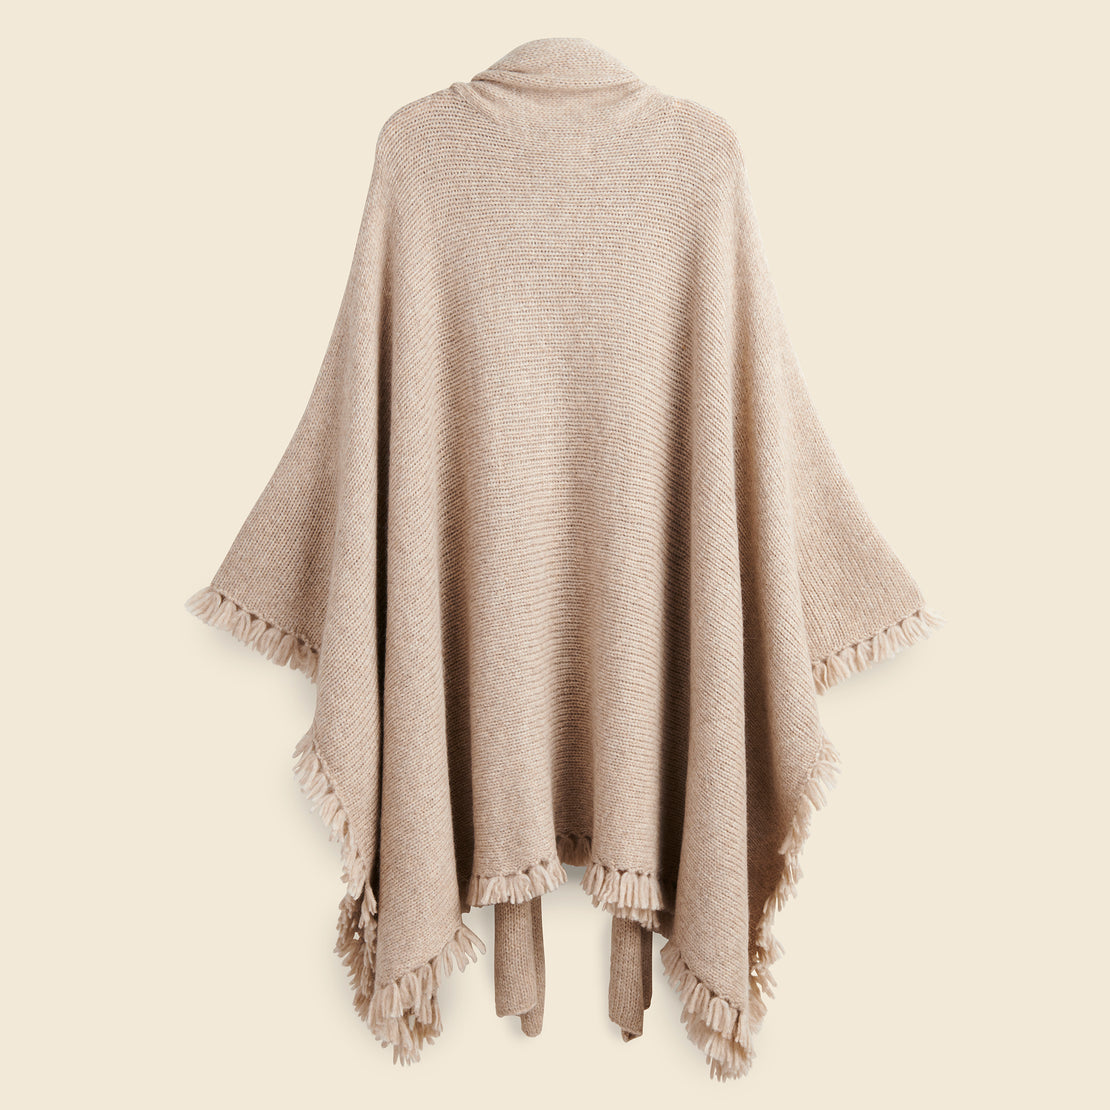 Scarf Sweater Poncho - Deer - Atelier Delphine - STAG Provisions - W - Tops - Sweater